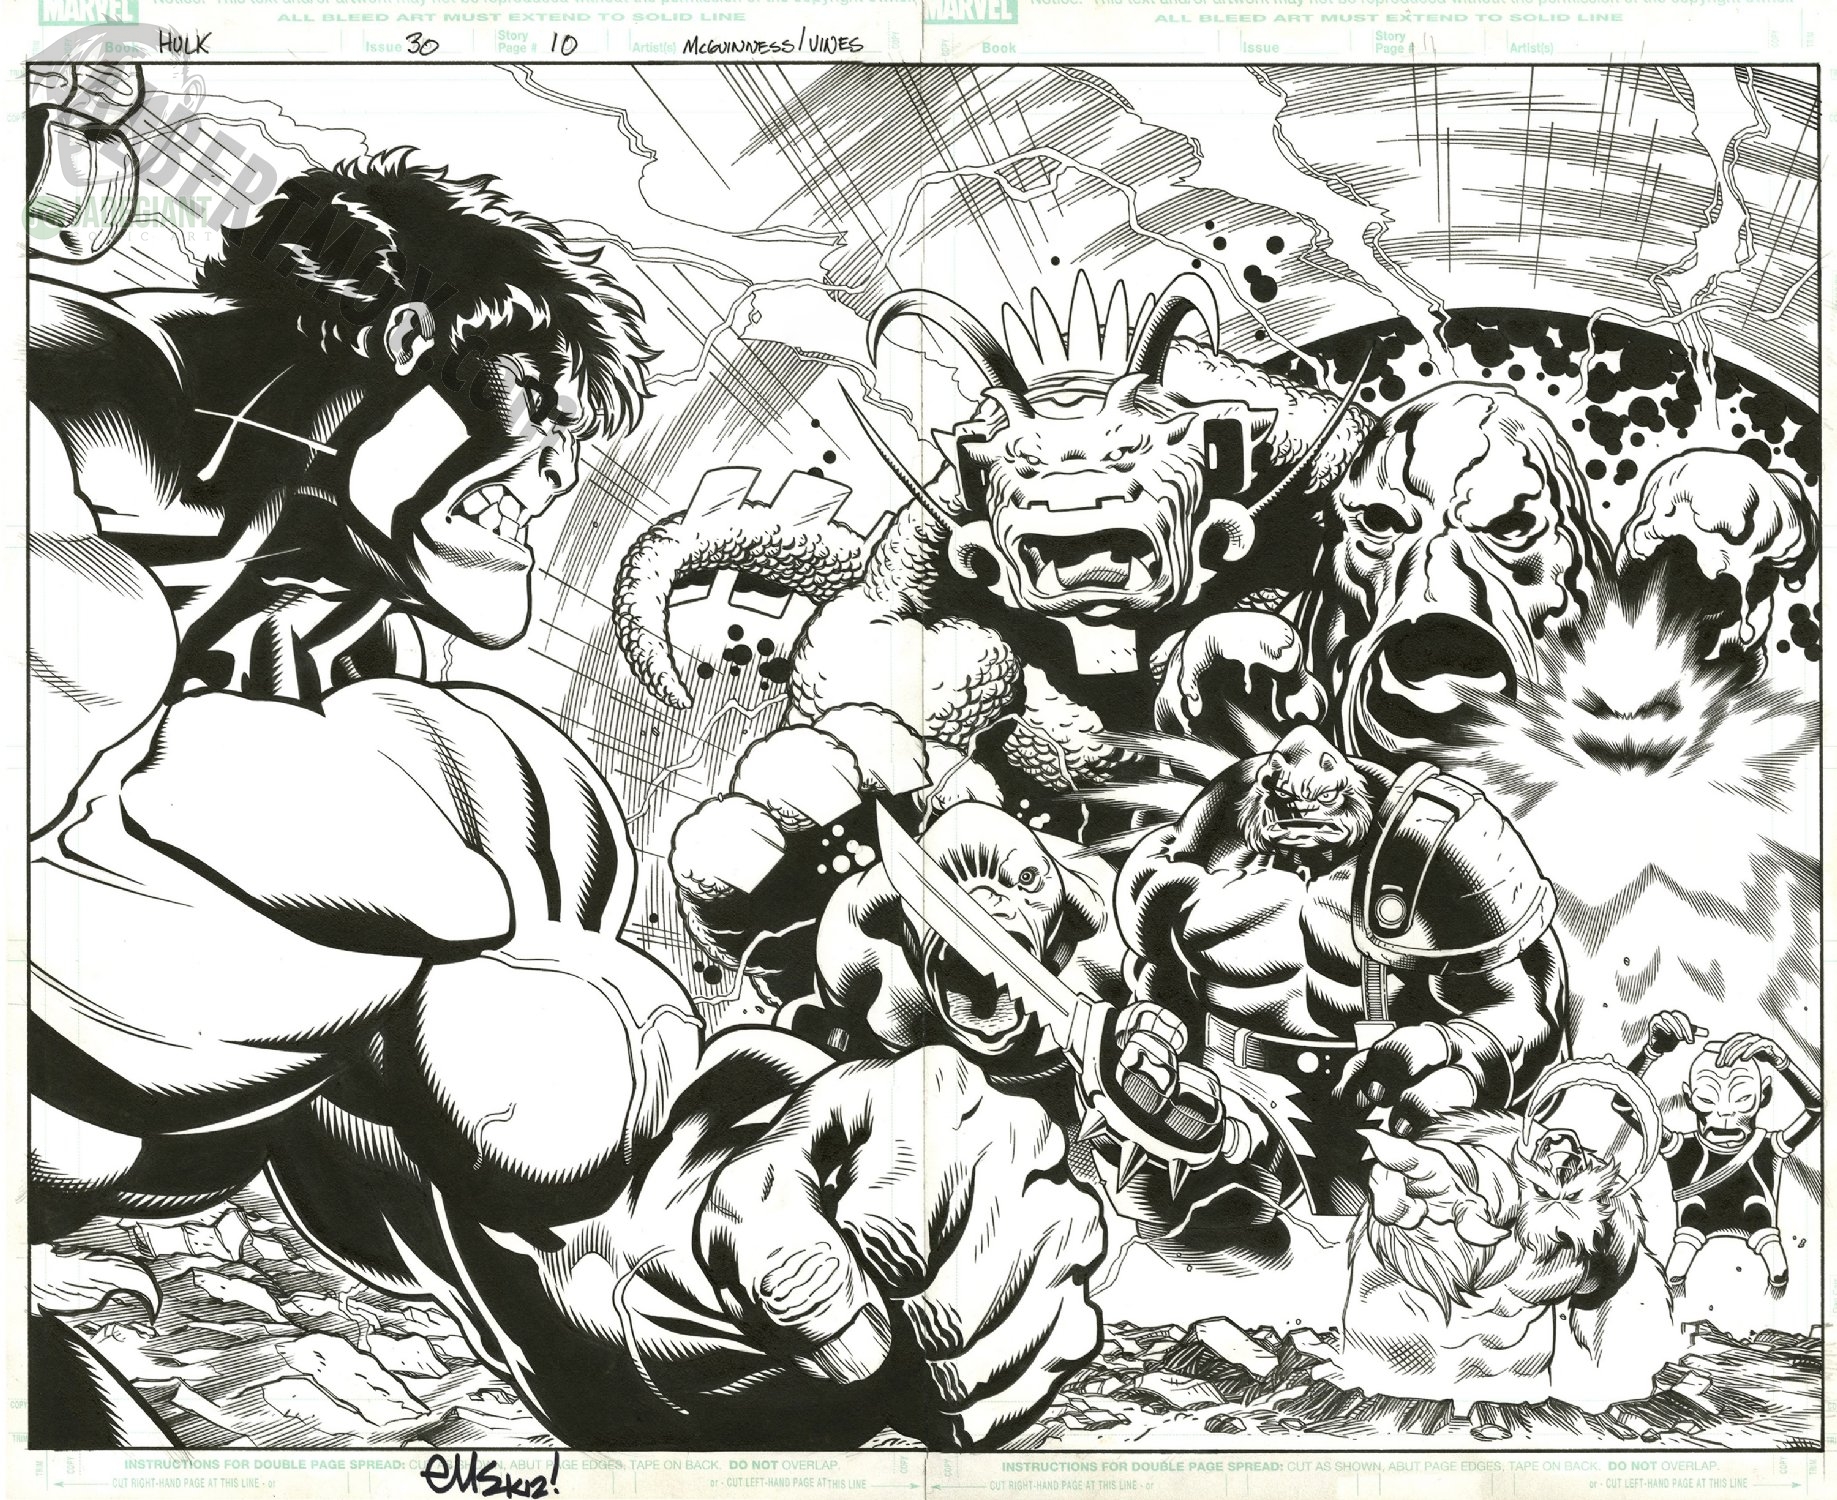 2011 Hulk issue 30 pages 10 and 11 by Ed McGuinness Comic Art